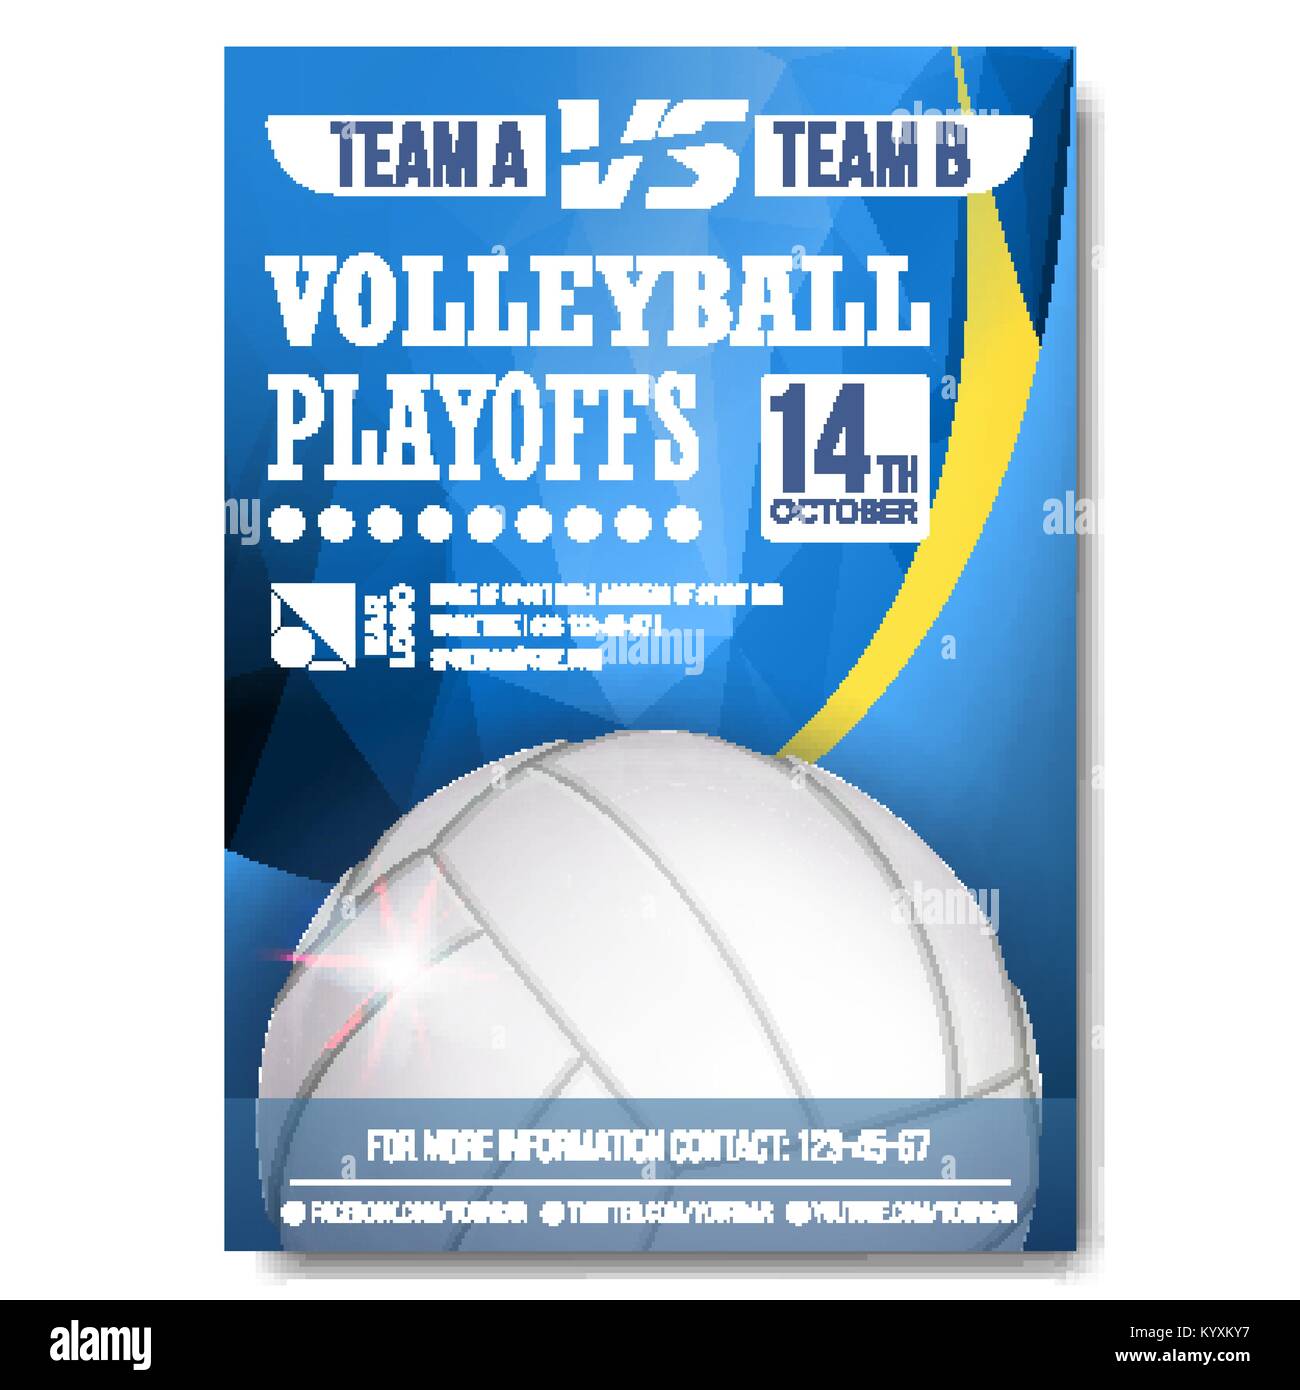 Volleyball Poster Vector. Design For Sport Bar Promotion. Volleyball Ball. Modern Tournament. Championship Label A4 Size. Game Illustration Stock Vector